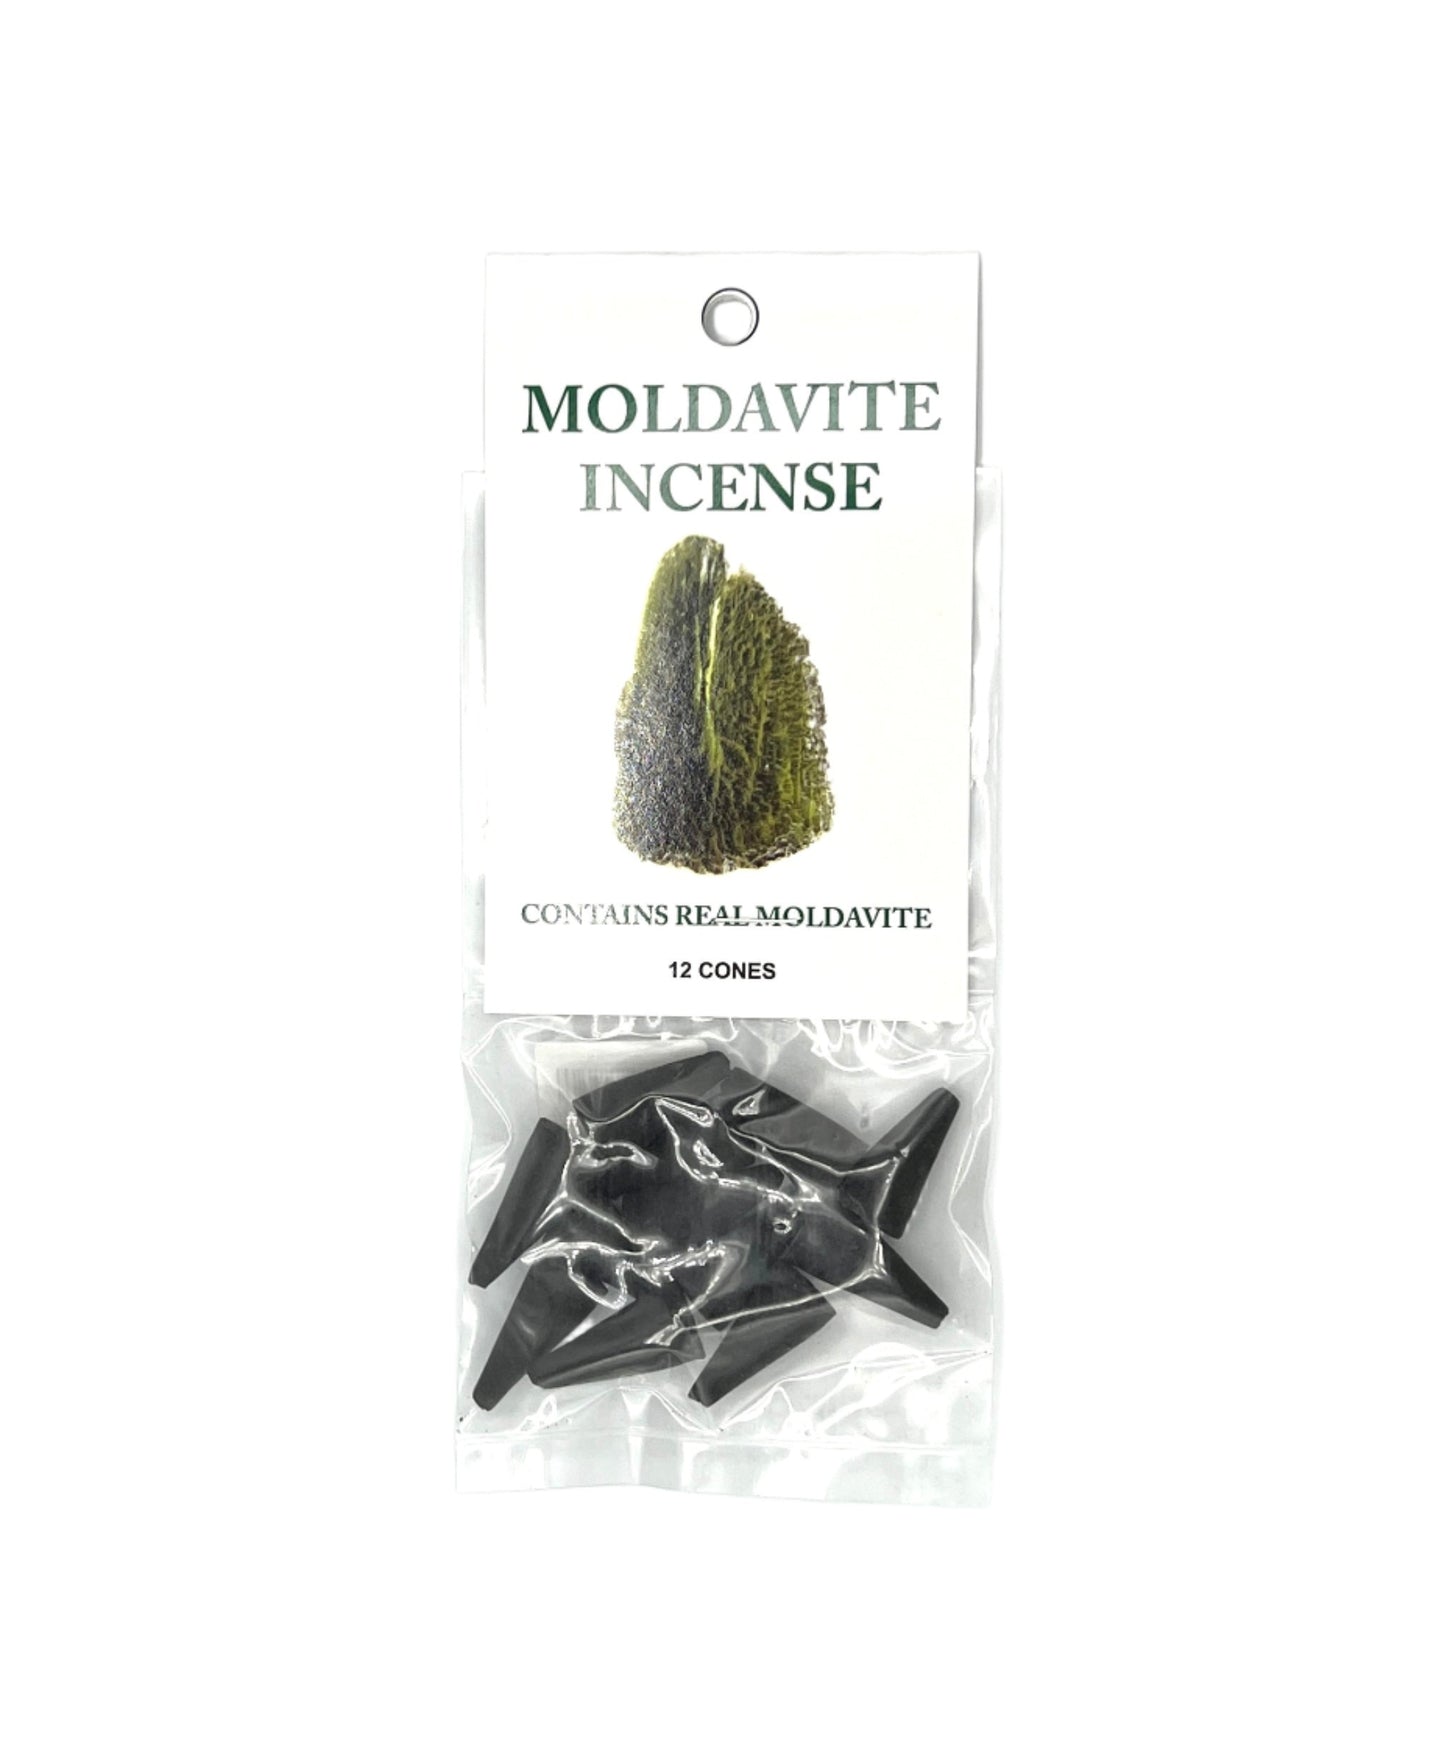 High Vibrational Energy Moldavite Infused Incense Cones